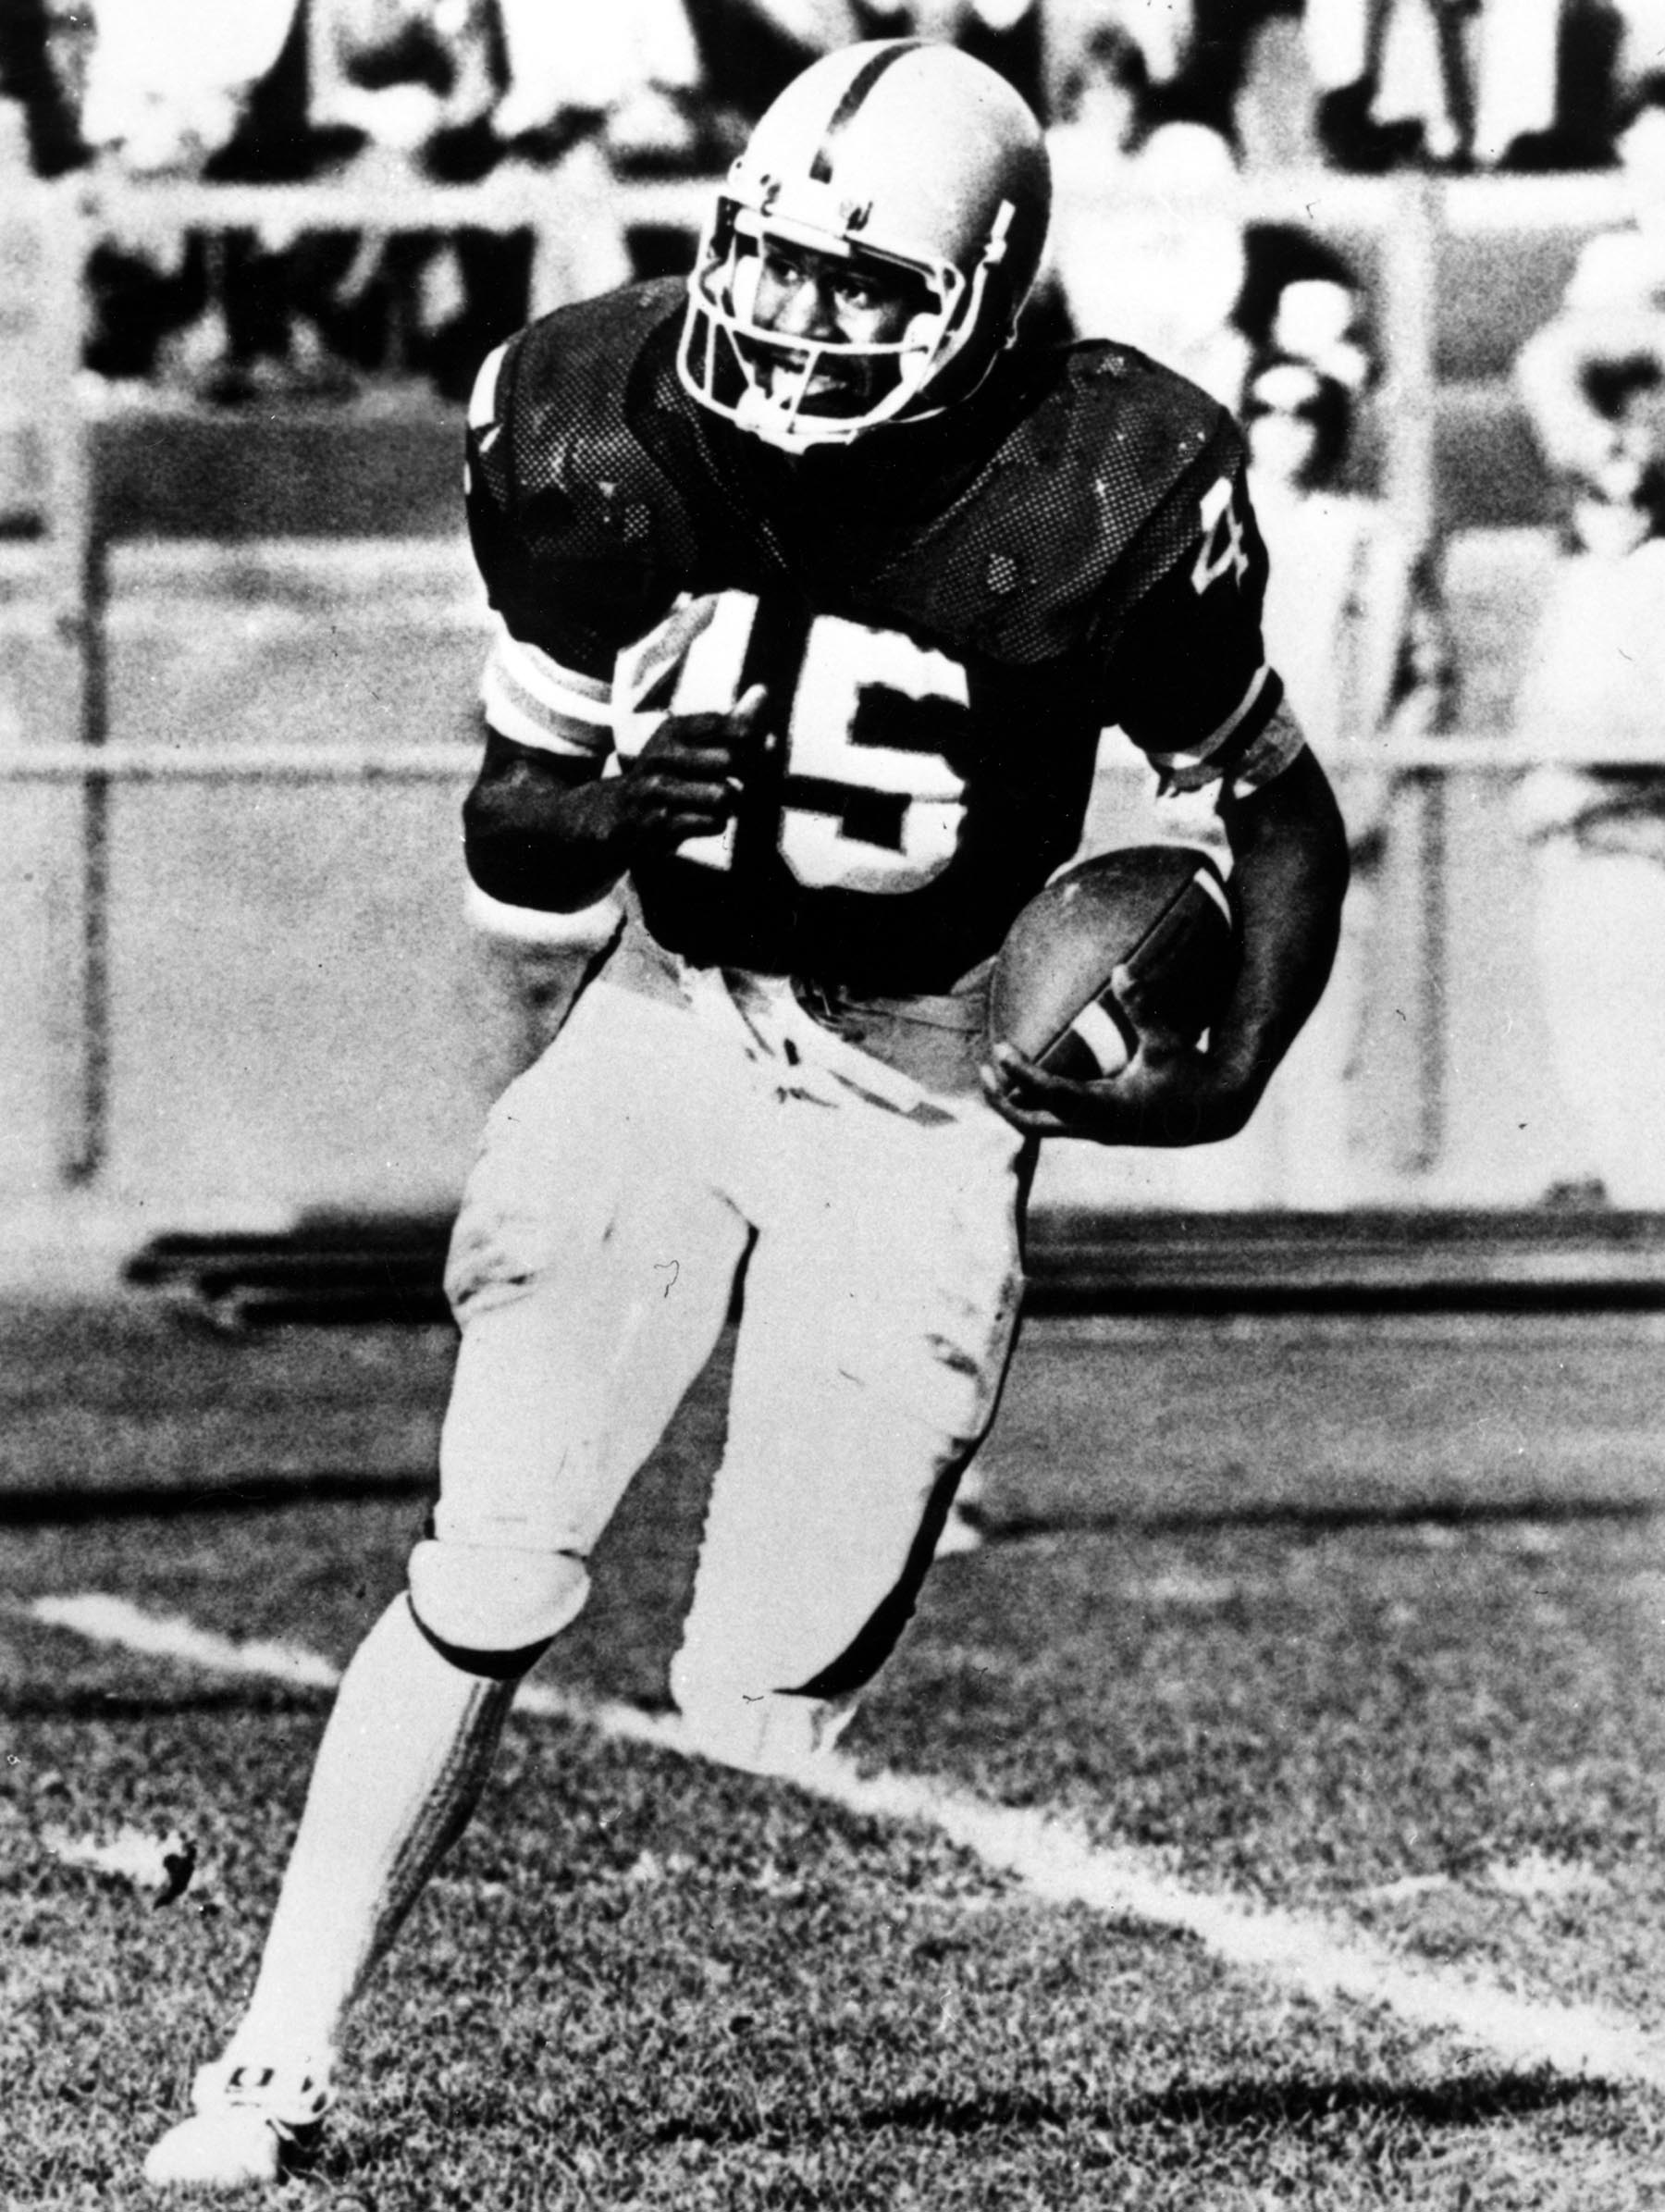 Art Monk, a native of White Plains and a 1976 graduated of White Plains High School, was elected to the College Football Hall of Fame Class of 2012. Monk was an outstanding wide receiver for Syracuse University from 1976-79.